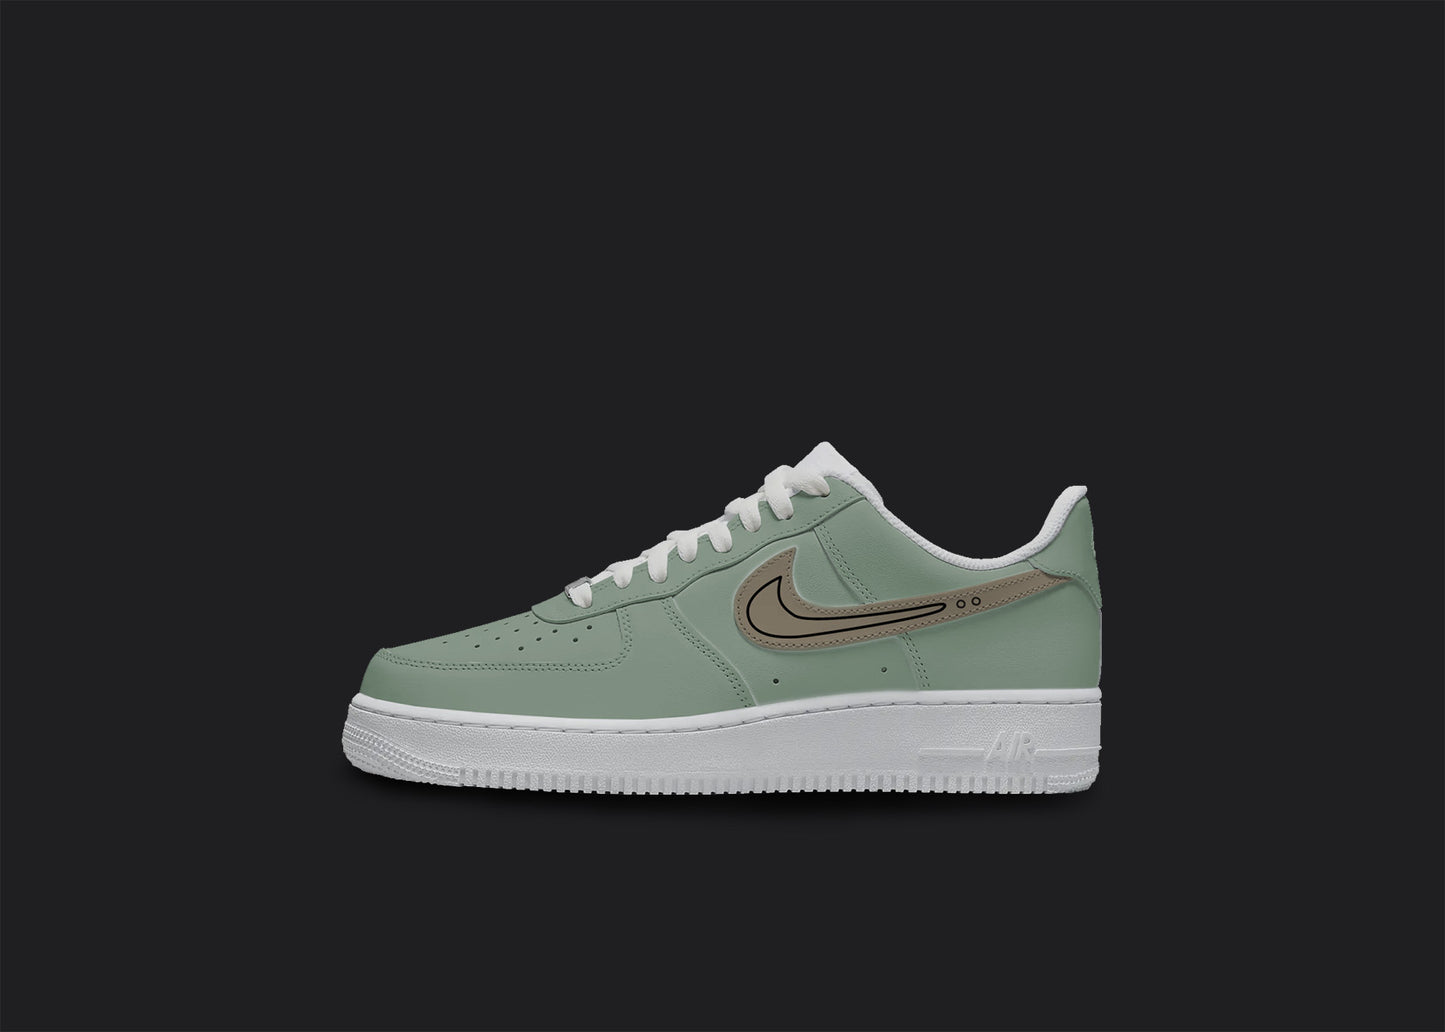 The image is of a Custom Nike Air force 1 sneaker on a blank black background. The white custom sneaker has a Green and brown colorway design.